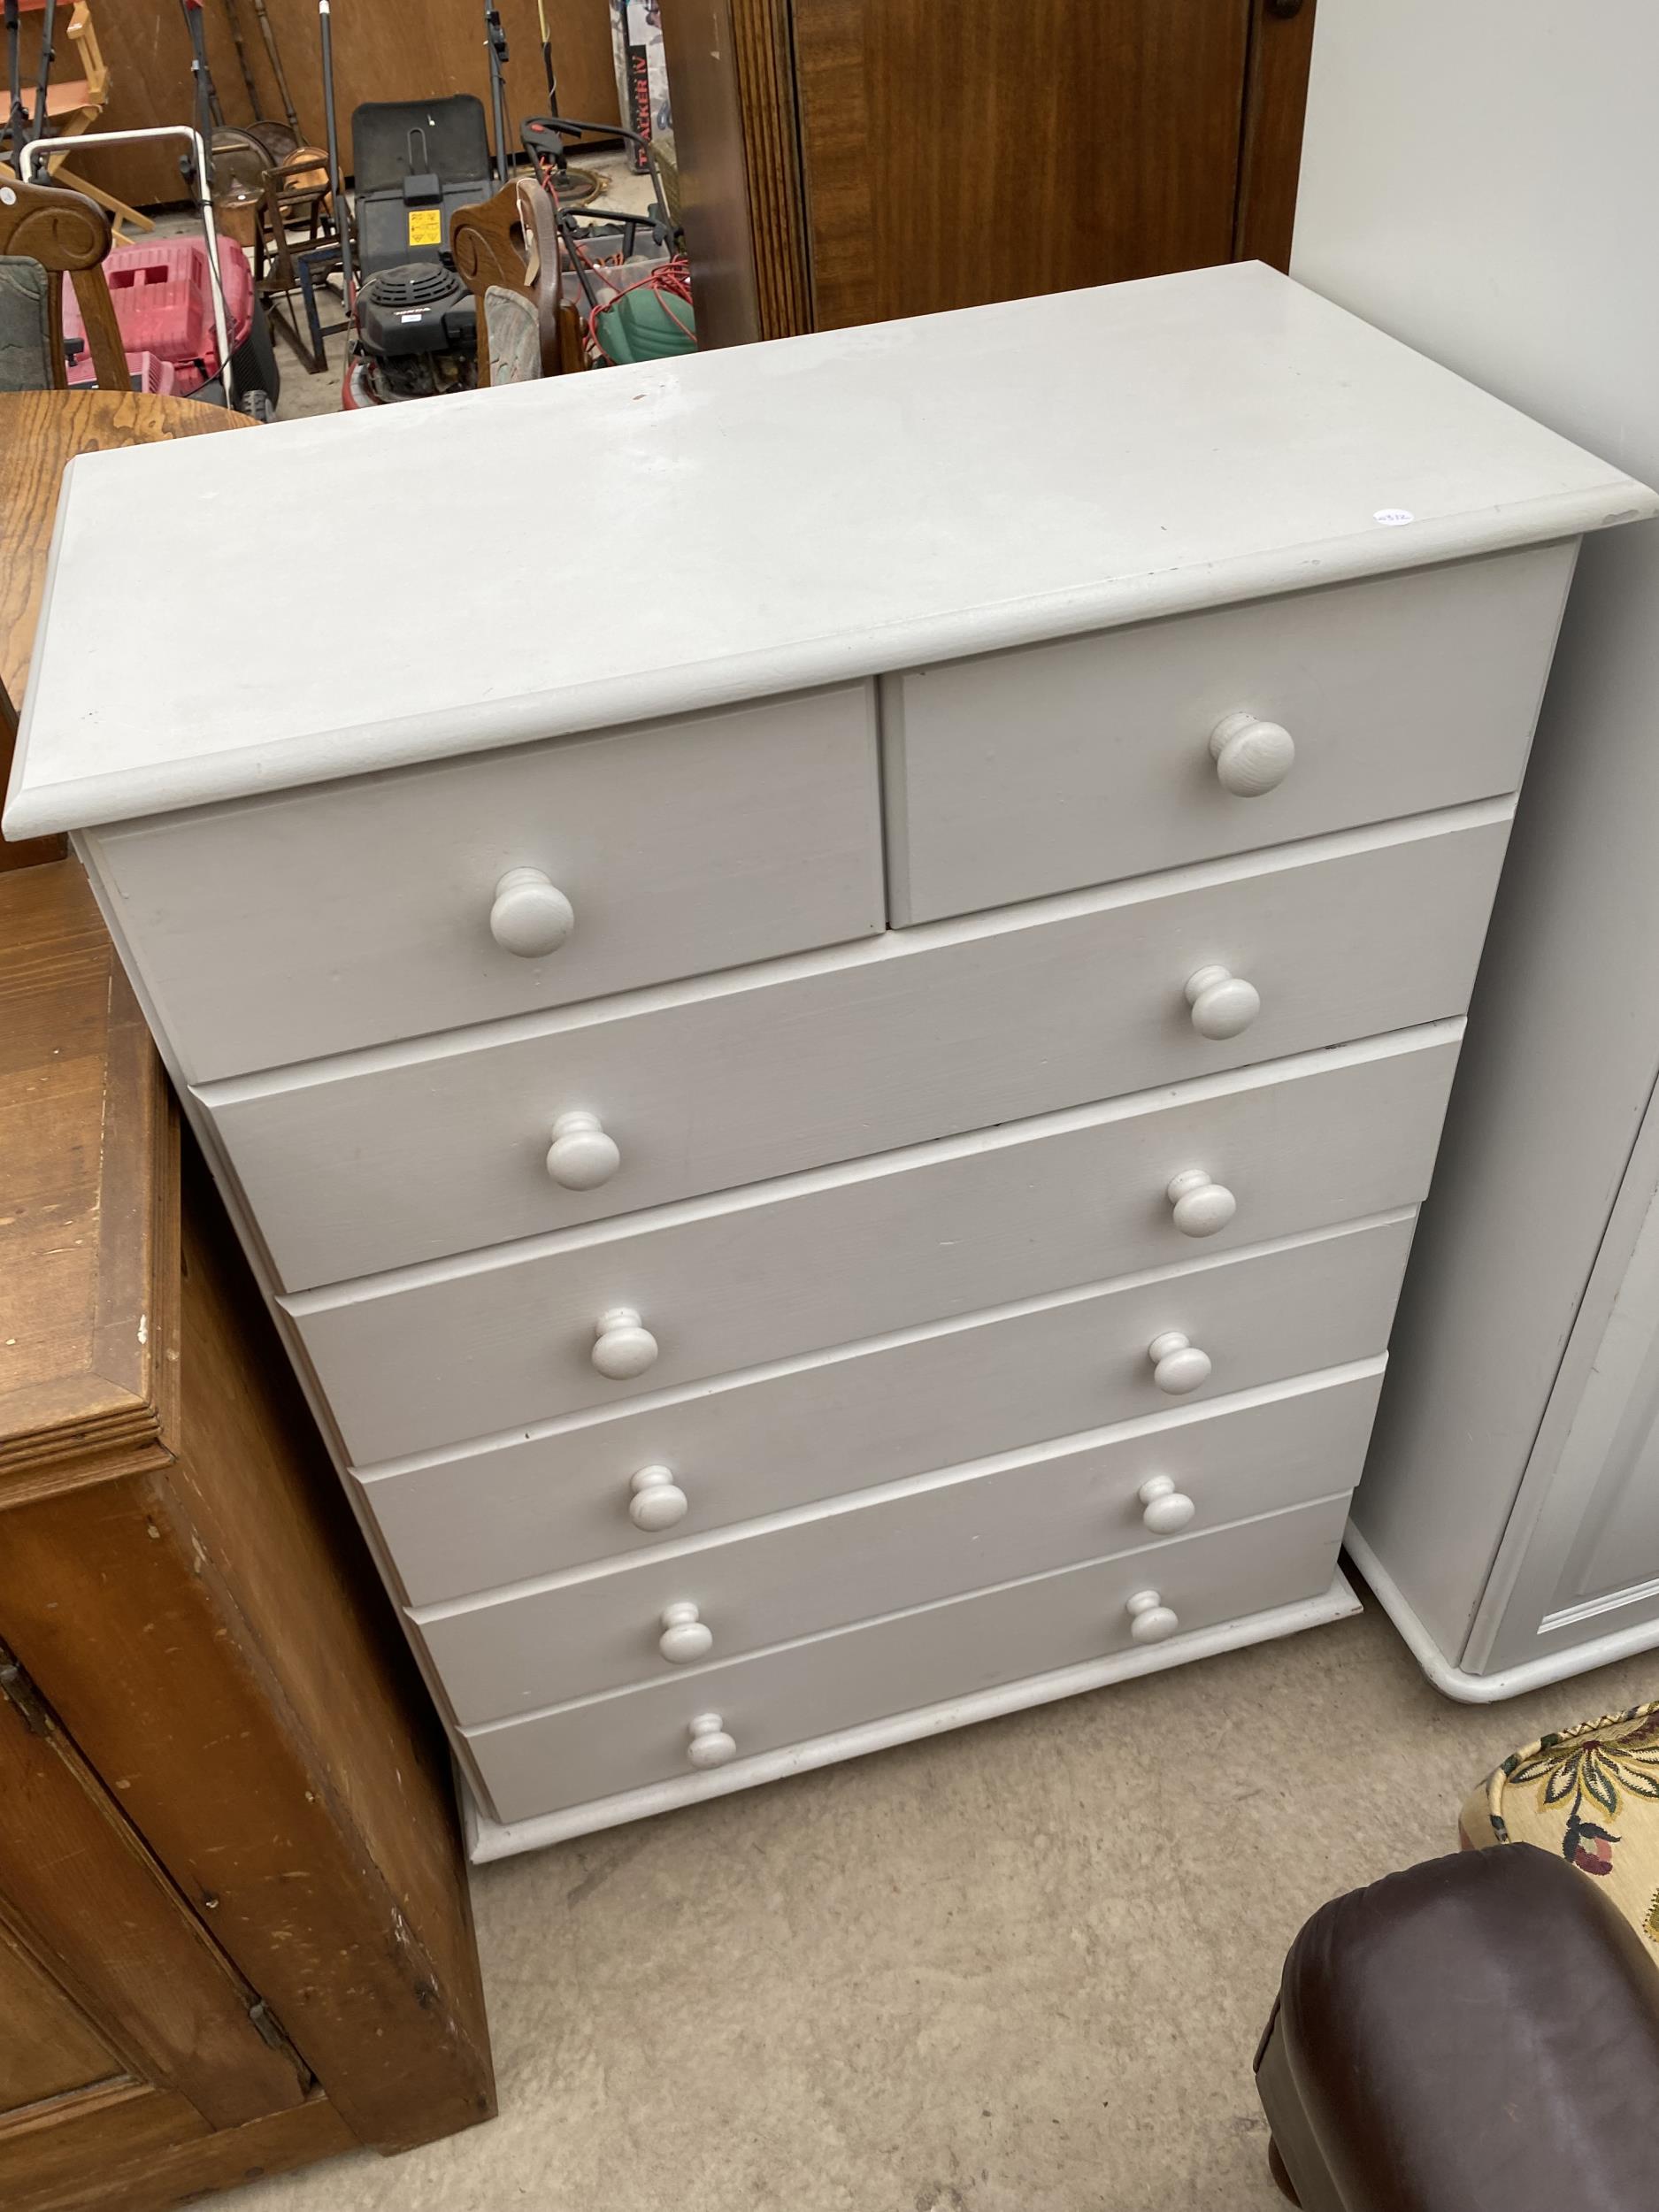 A MODERN TWO-DOOR PAINTED WARDROBE AND CHEST OF DRAWERS - Image 2 of 5